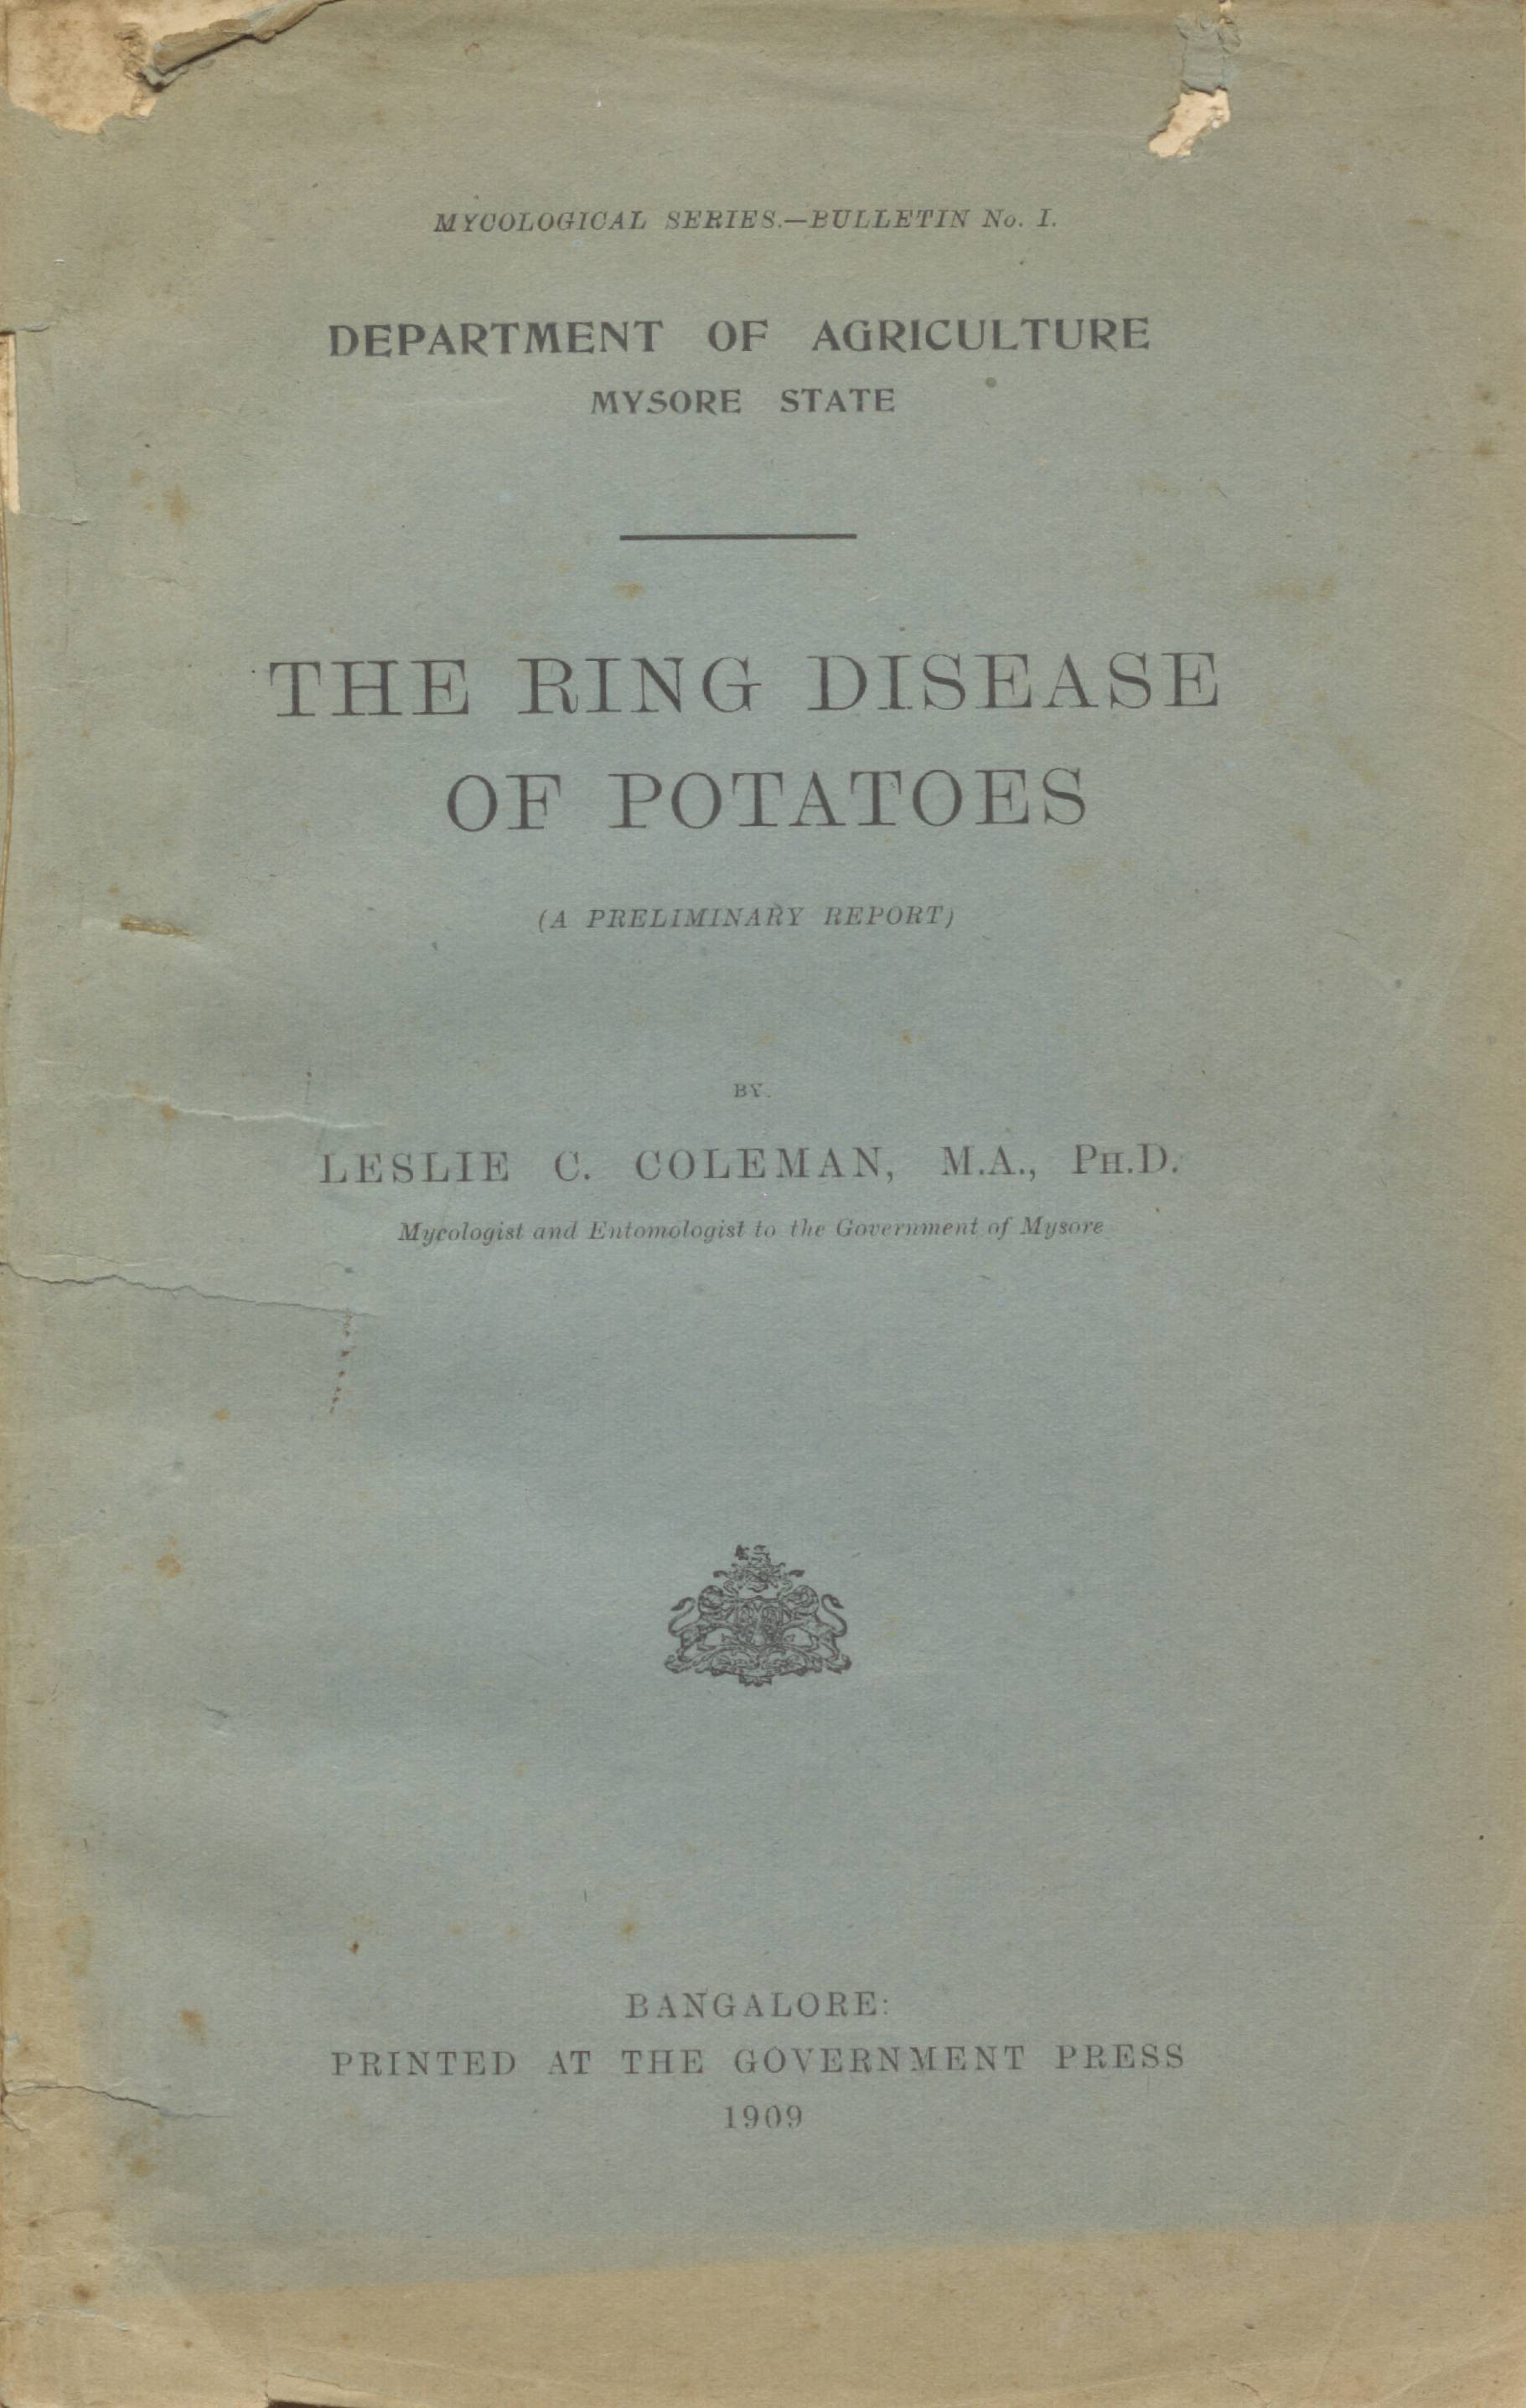 The Ring Disease of Potatoes (A Preliminary Report)